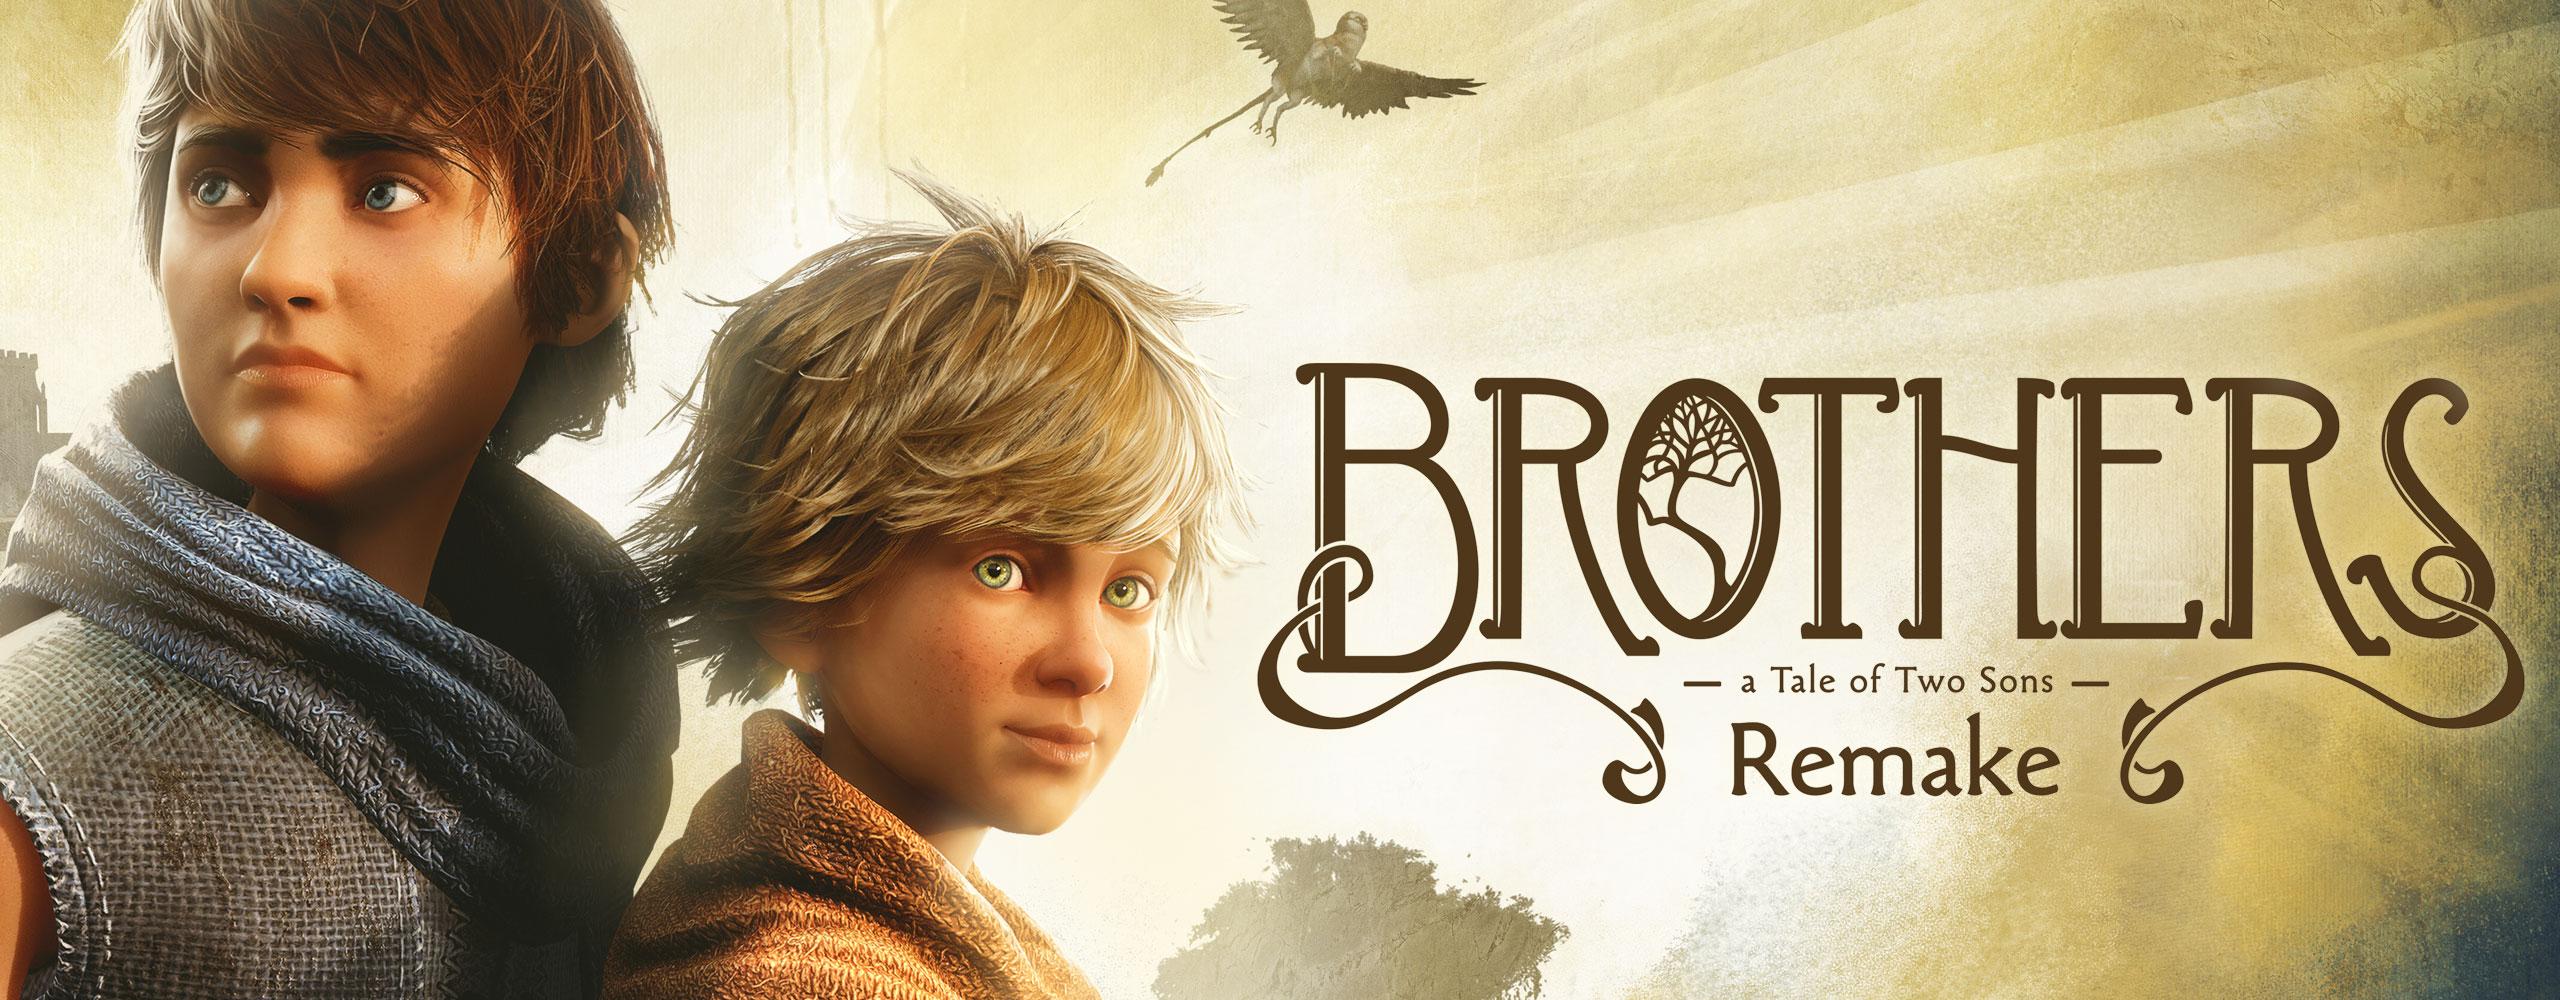 Brothers: A Tale of Two Sons Remake Is Now Available!